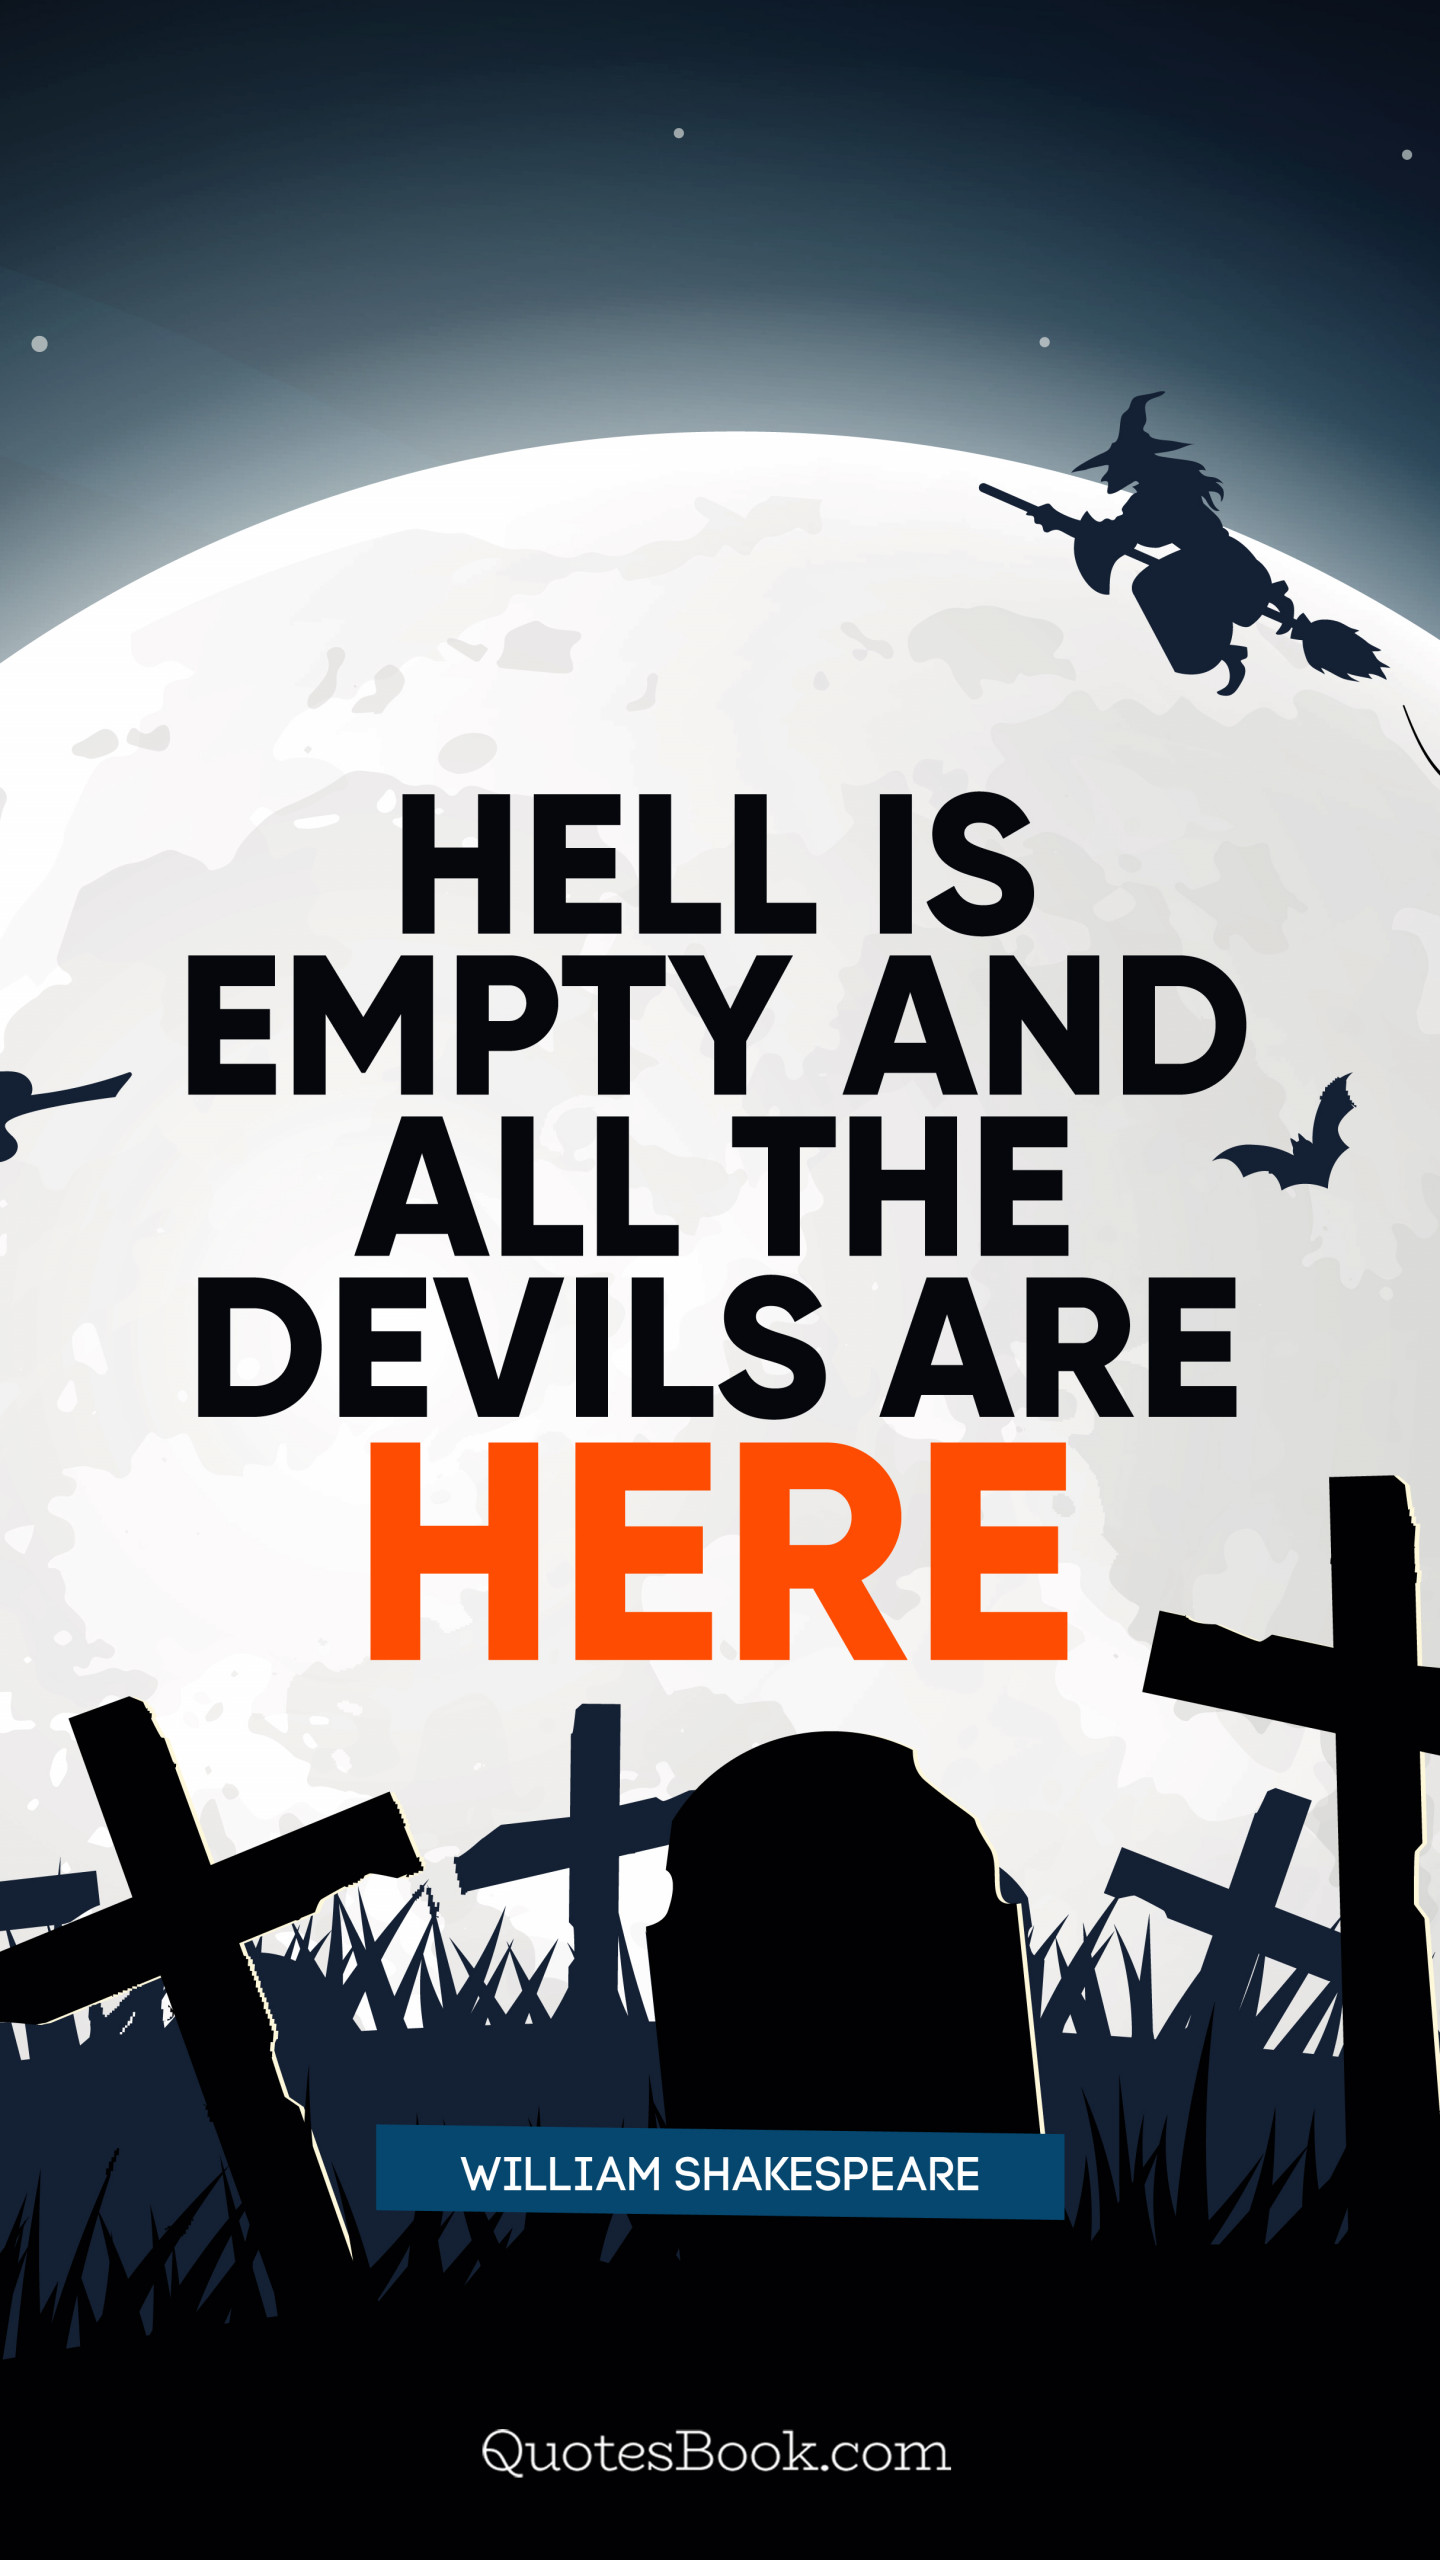 hell is empty and all the devils are here 1440x2560 4365